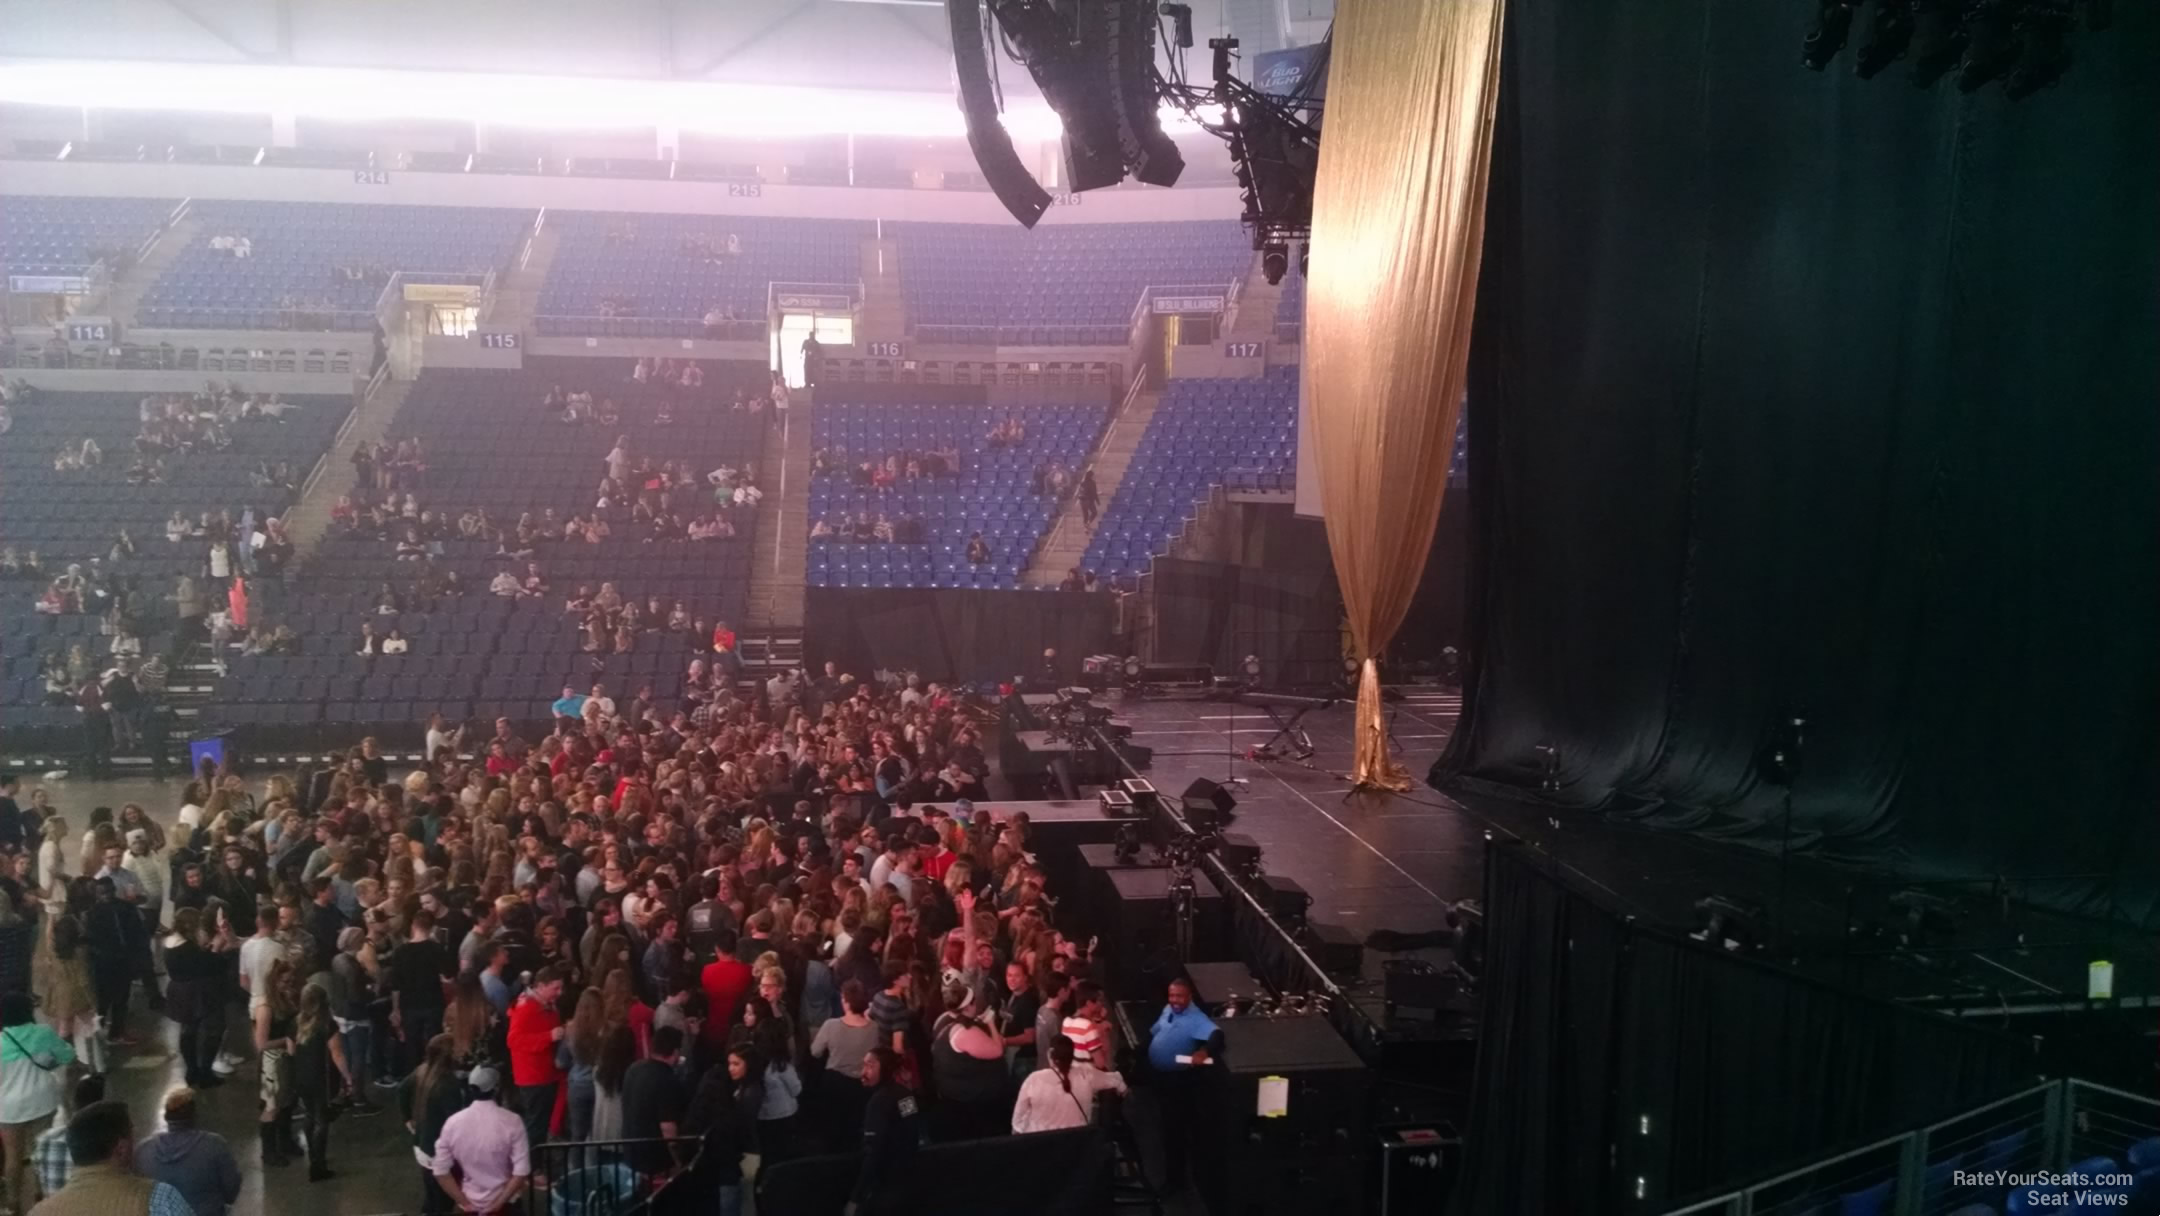 section 102, row n seat view  for concert - chaifetz arena